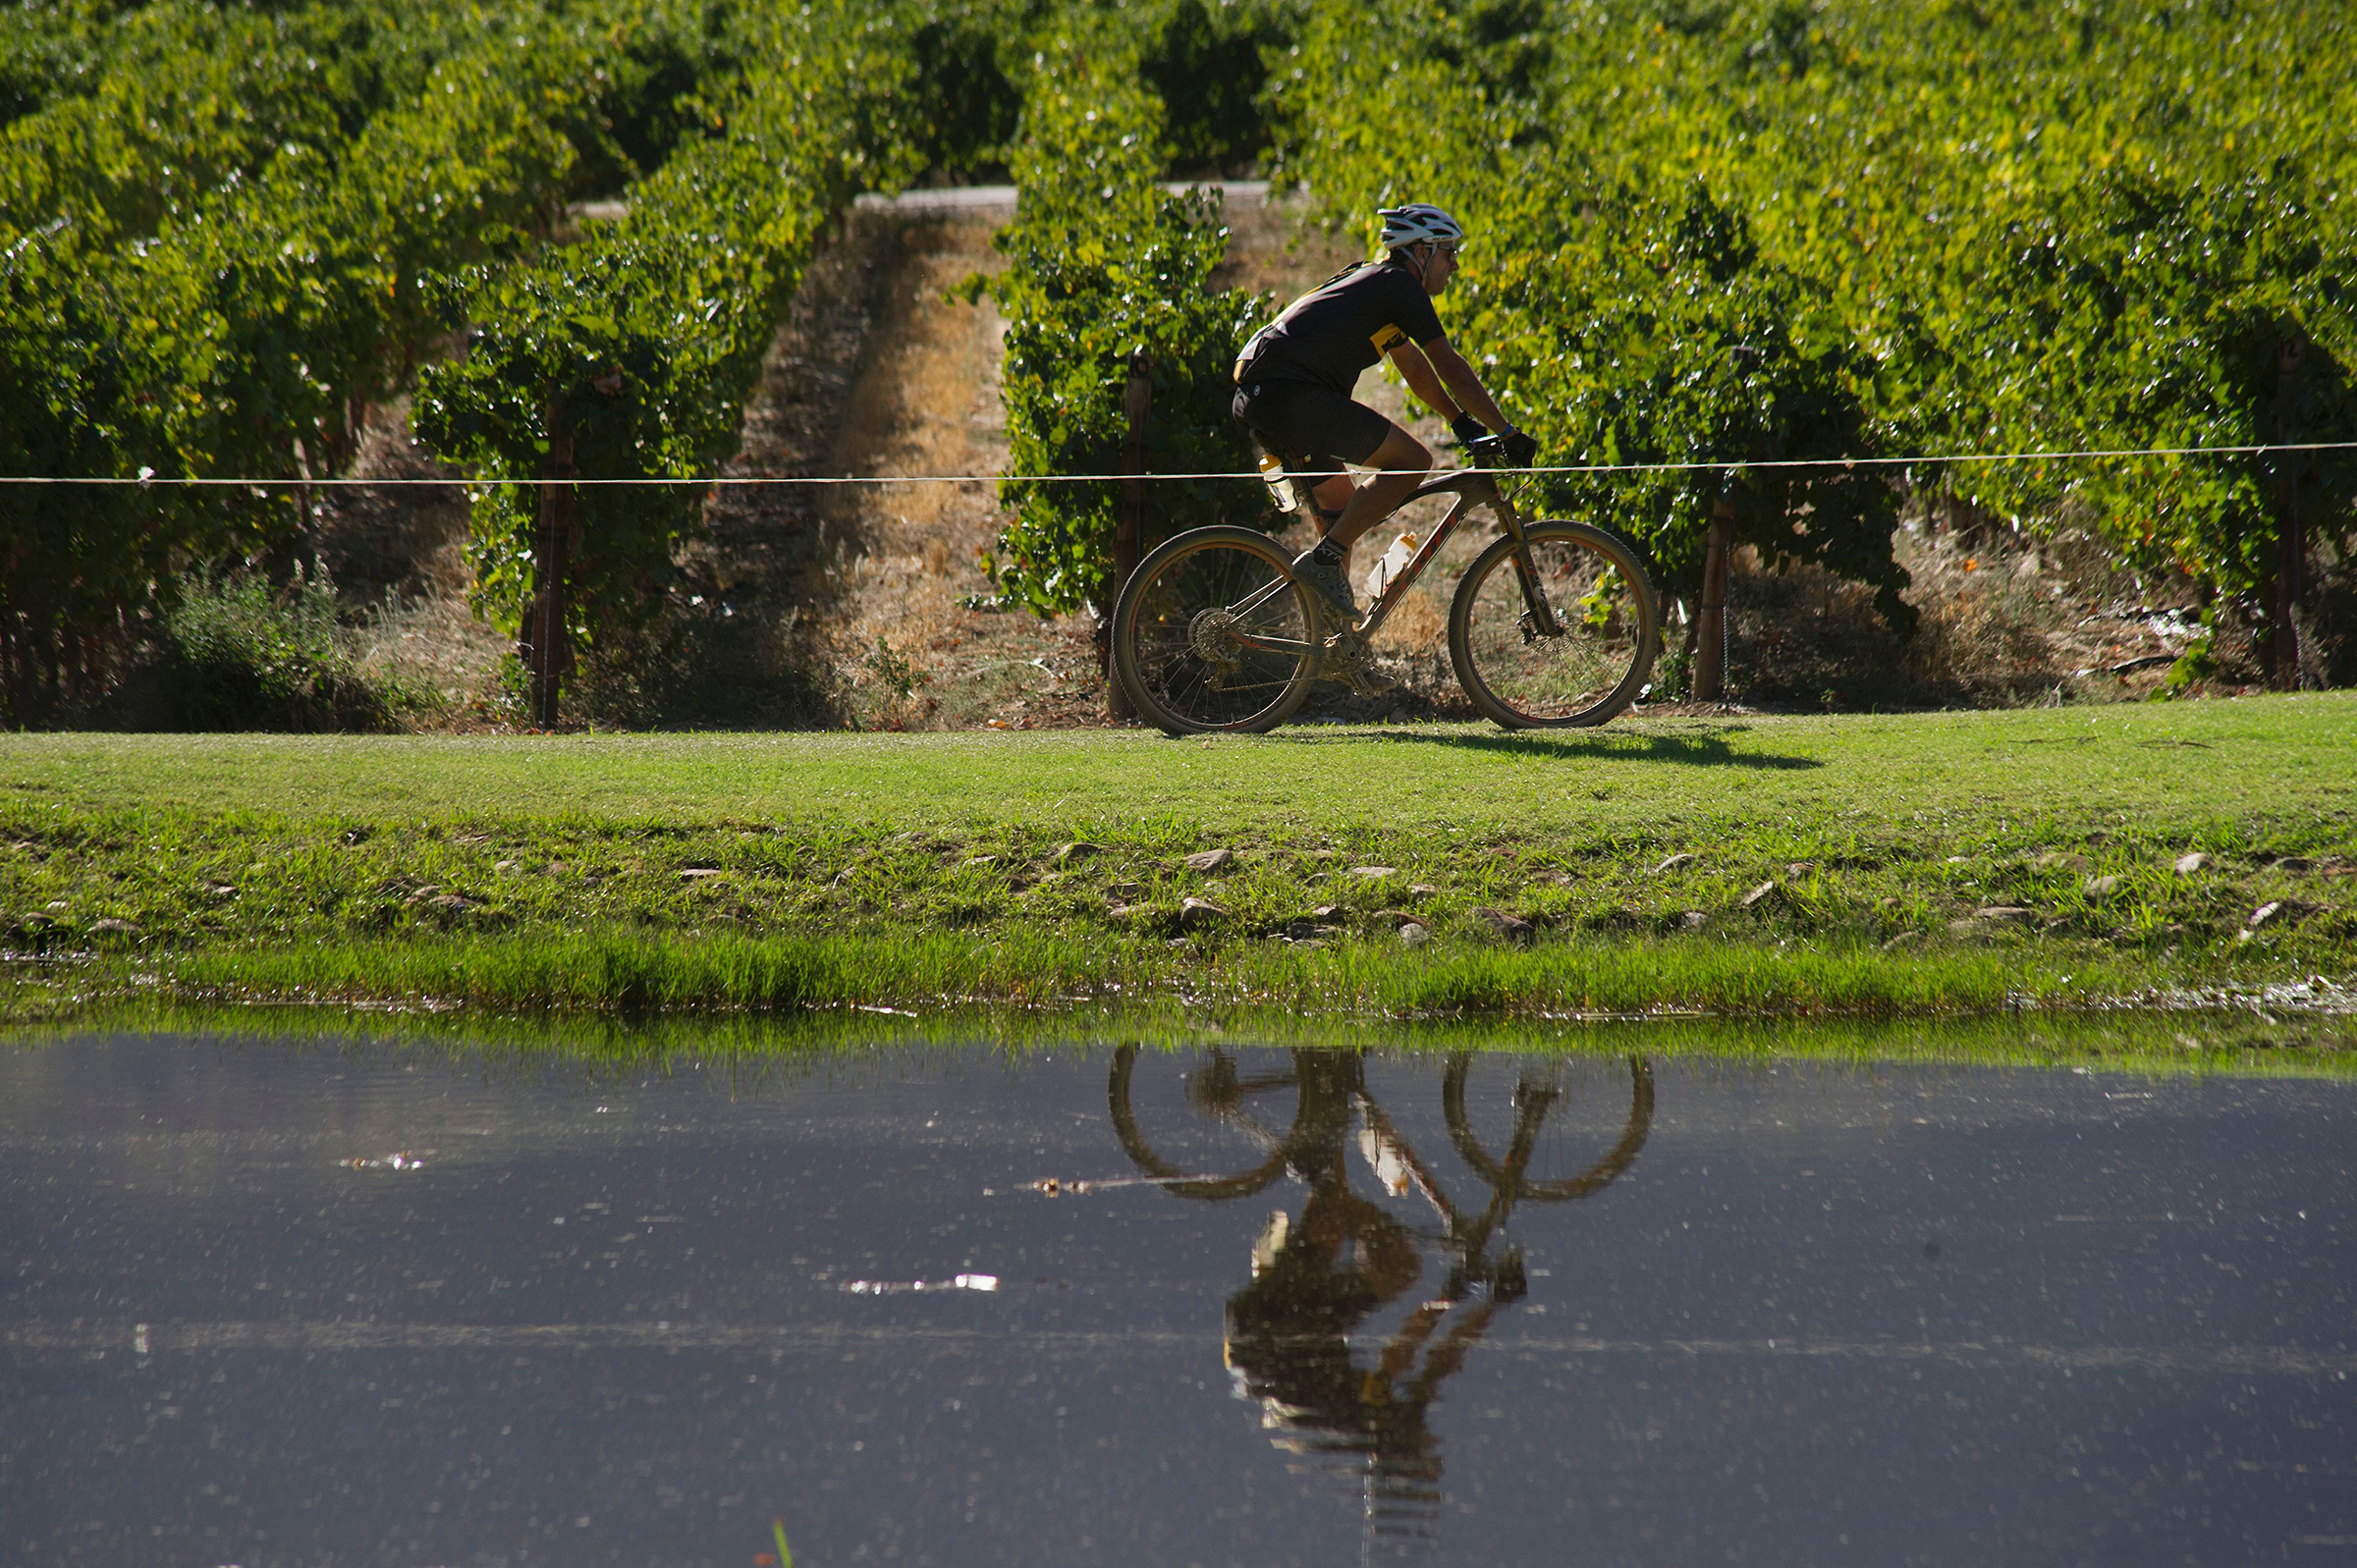 45 minutes from Cape Town Bike and wine tasting in Stellenbosch and Franschhoek